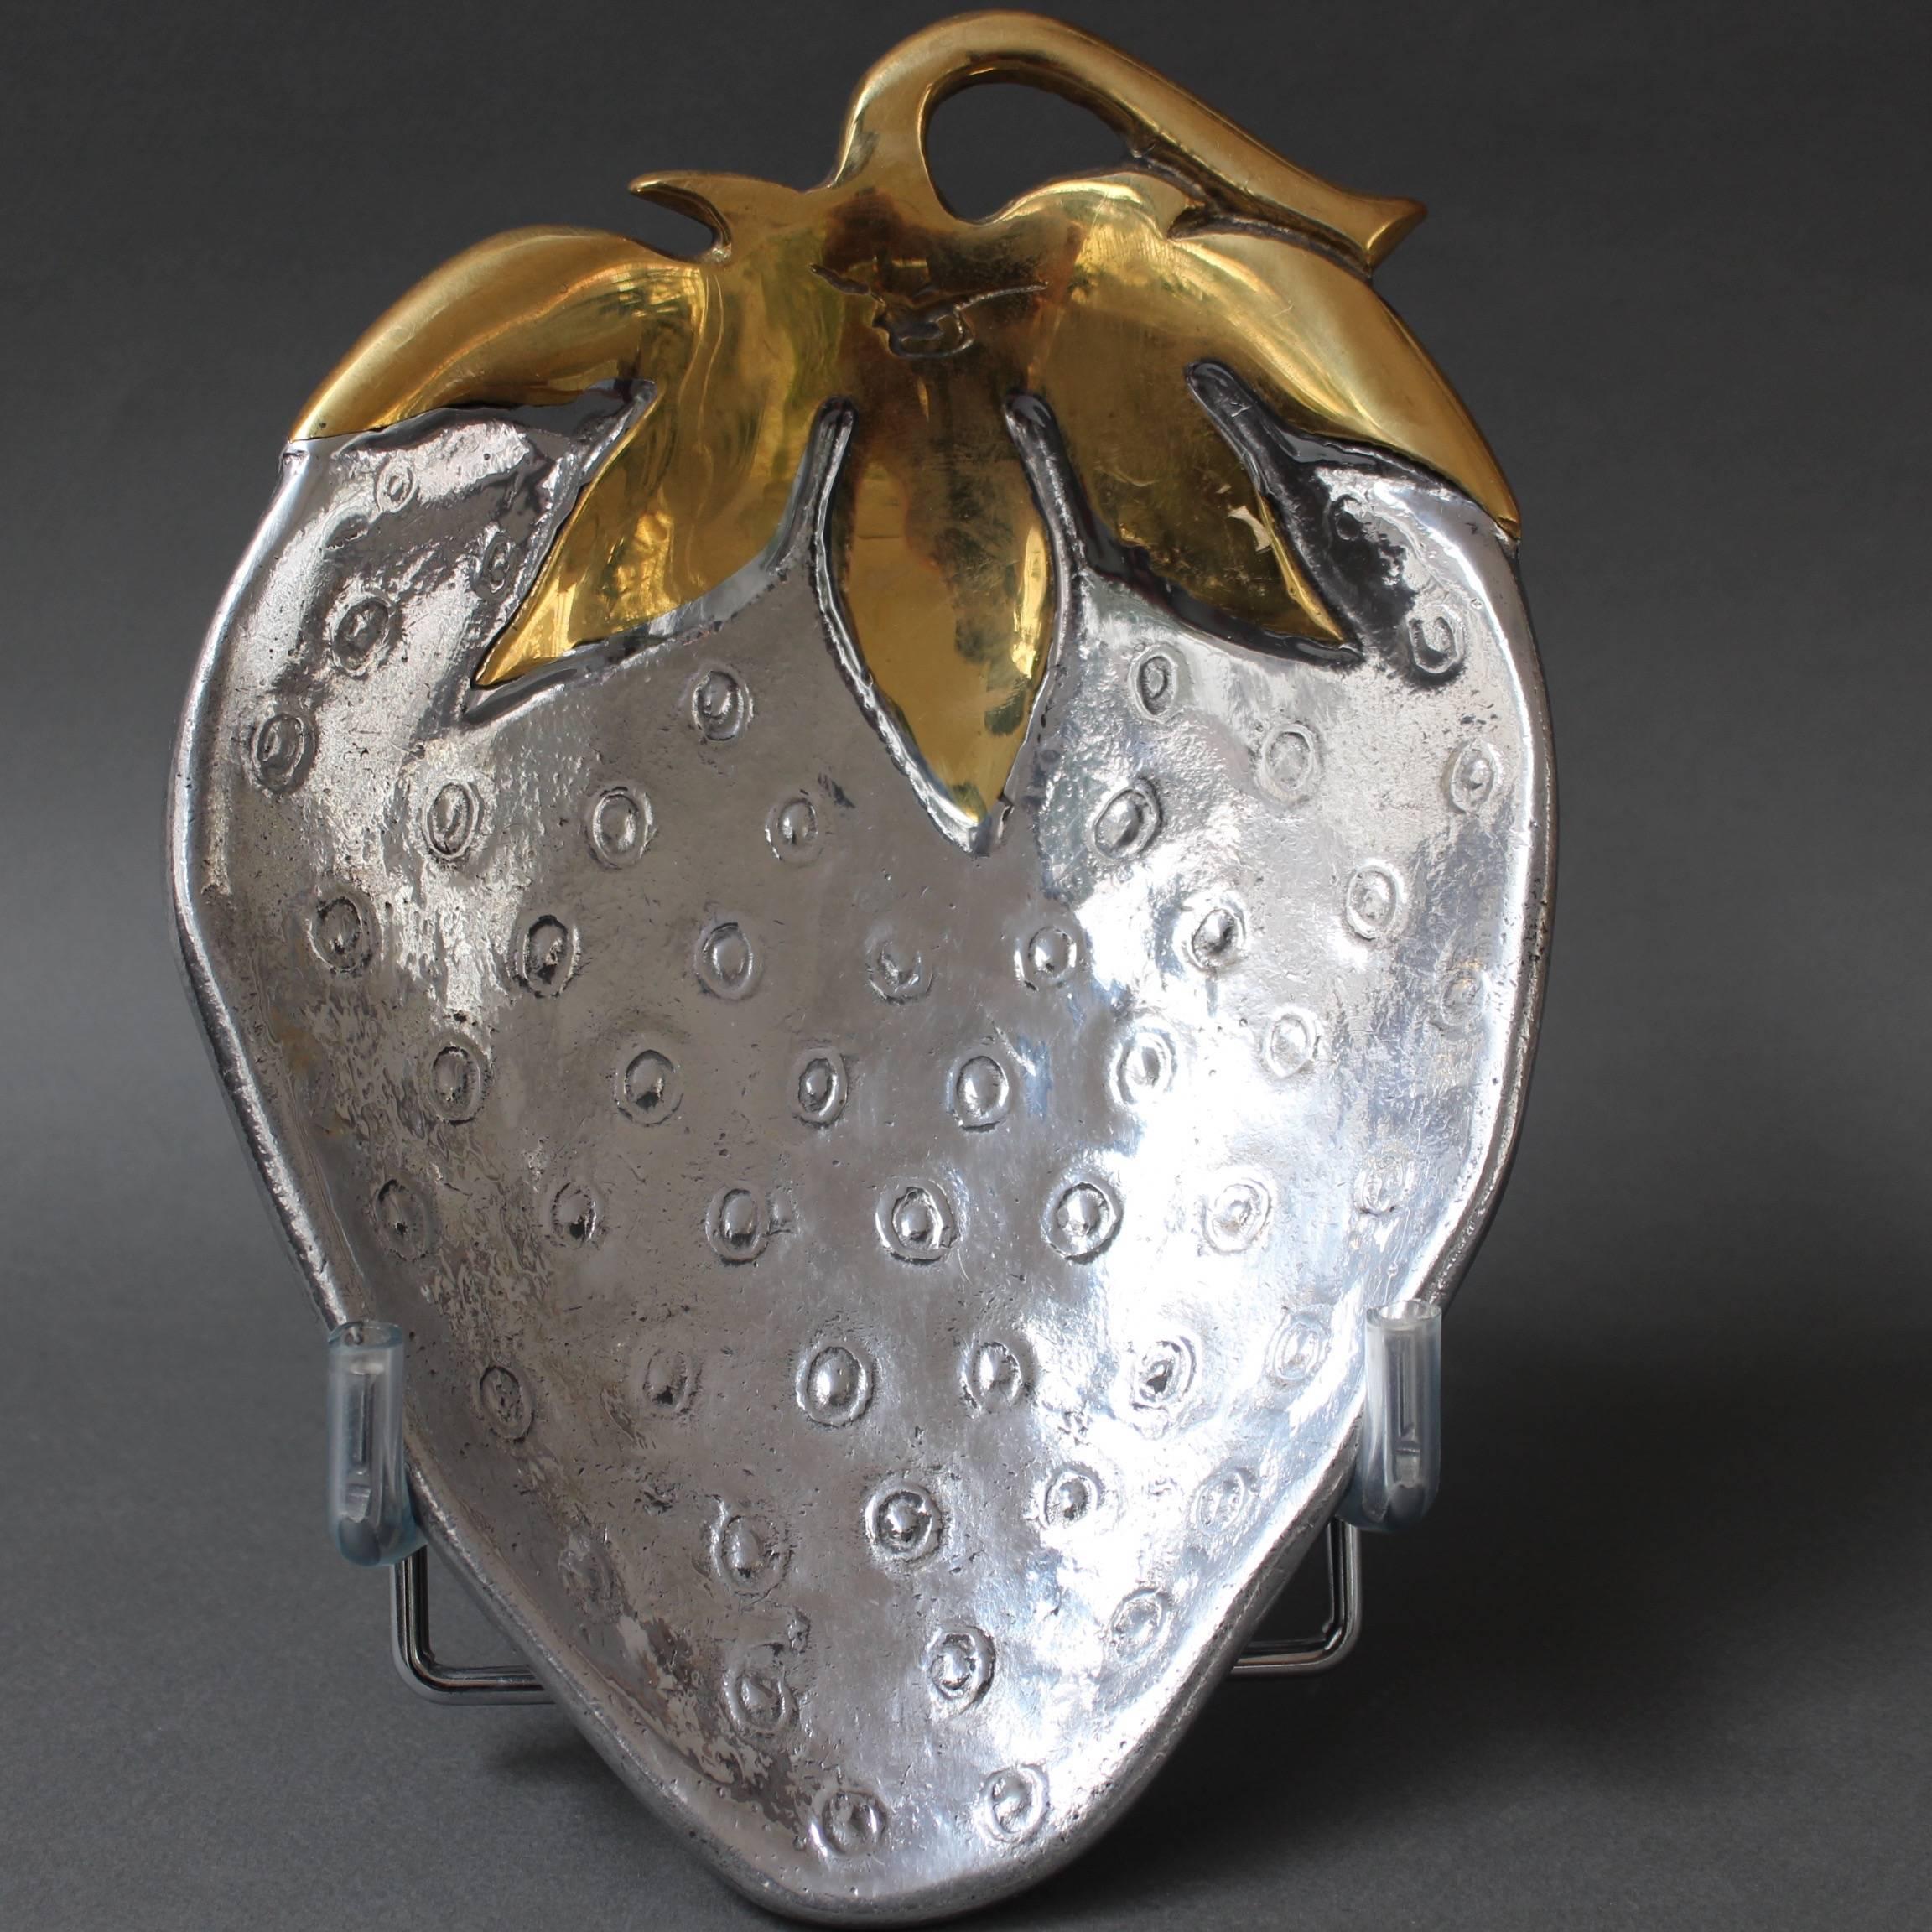 Decorative brass and aluminium strawberry-shaped tray in the style of David Marshall. This modernist tray is elegant, stylish and completely unique making it a real conversation piece. The tray is very weighty, polished to a shine with a single